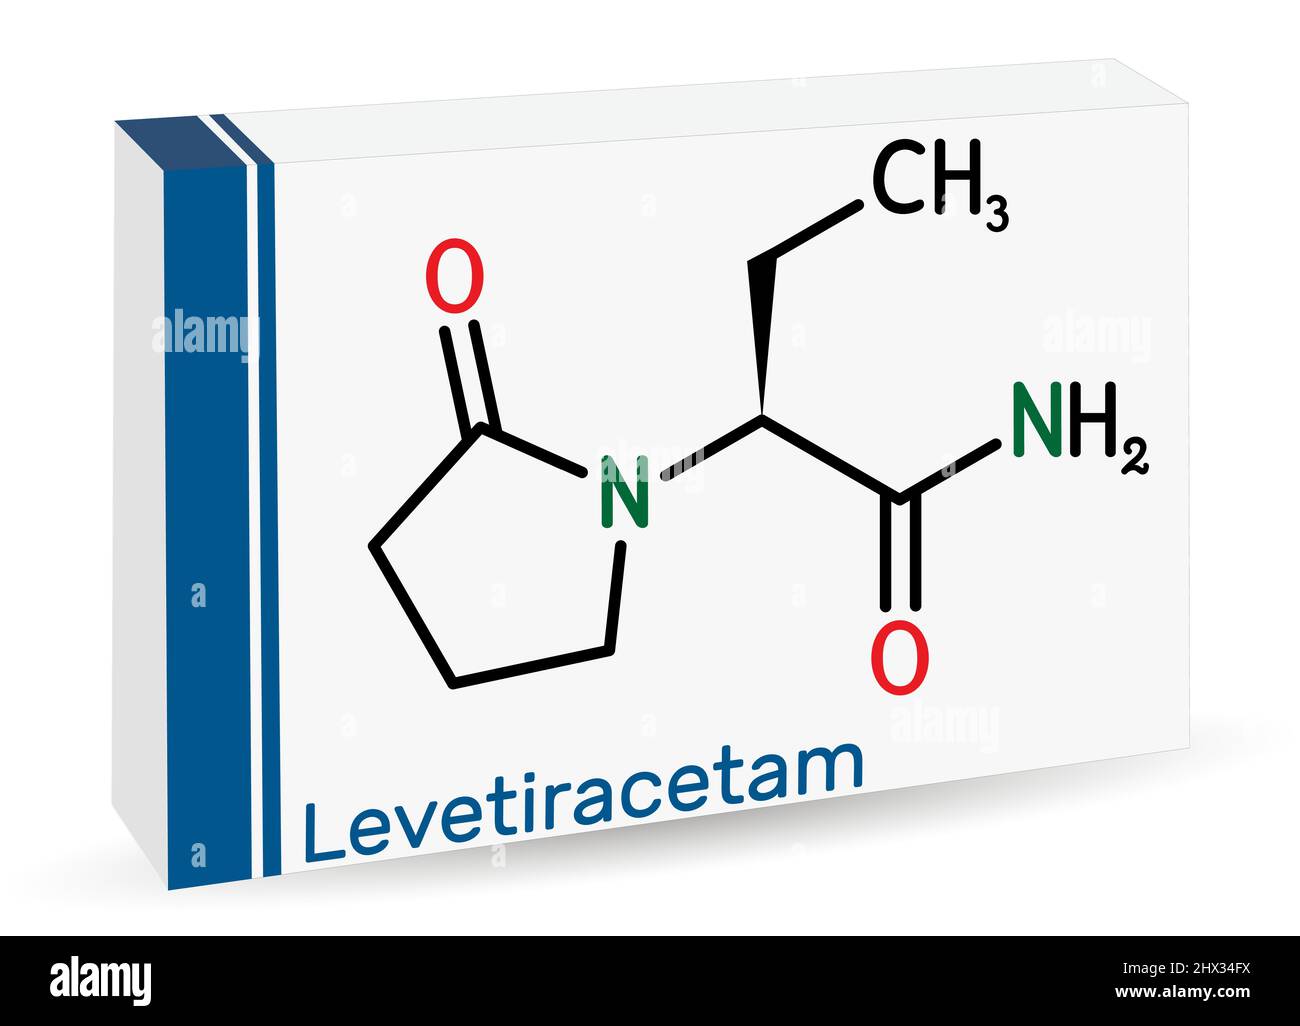 Levetiracetam molecule. It is pyrrolidine, anticonvulsant medication used to treat epilepsy. Skeletal chemical formula. Paper packaging for drugs. Vec Stock Vector